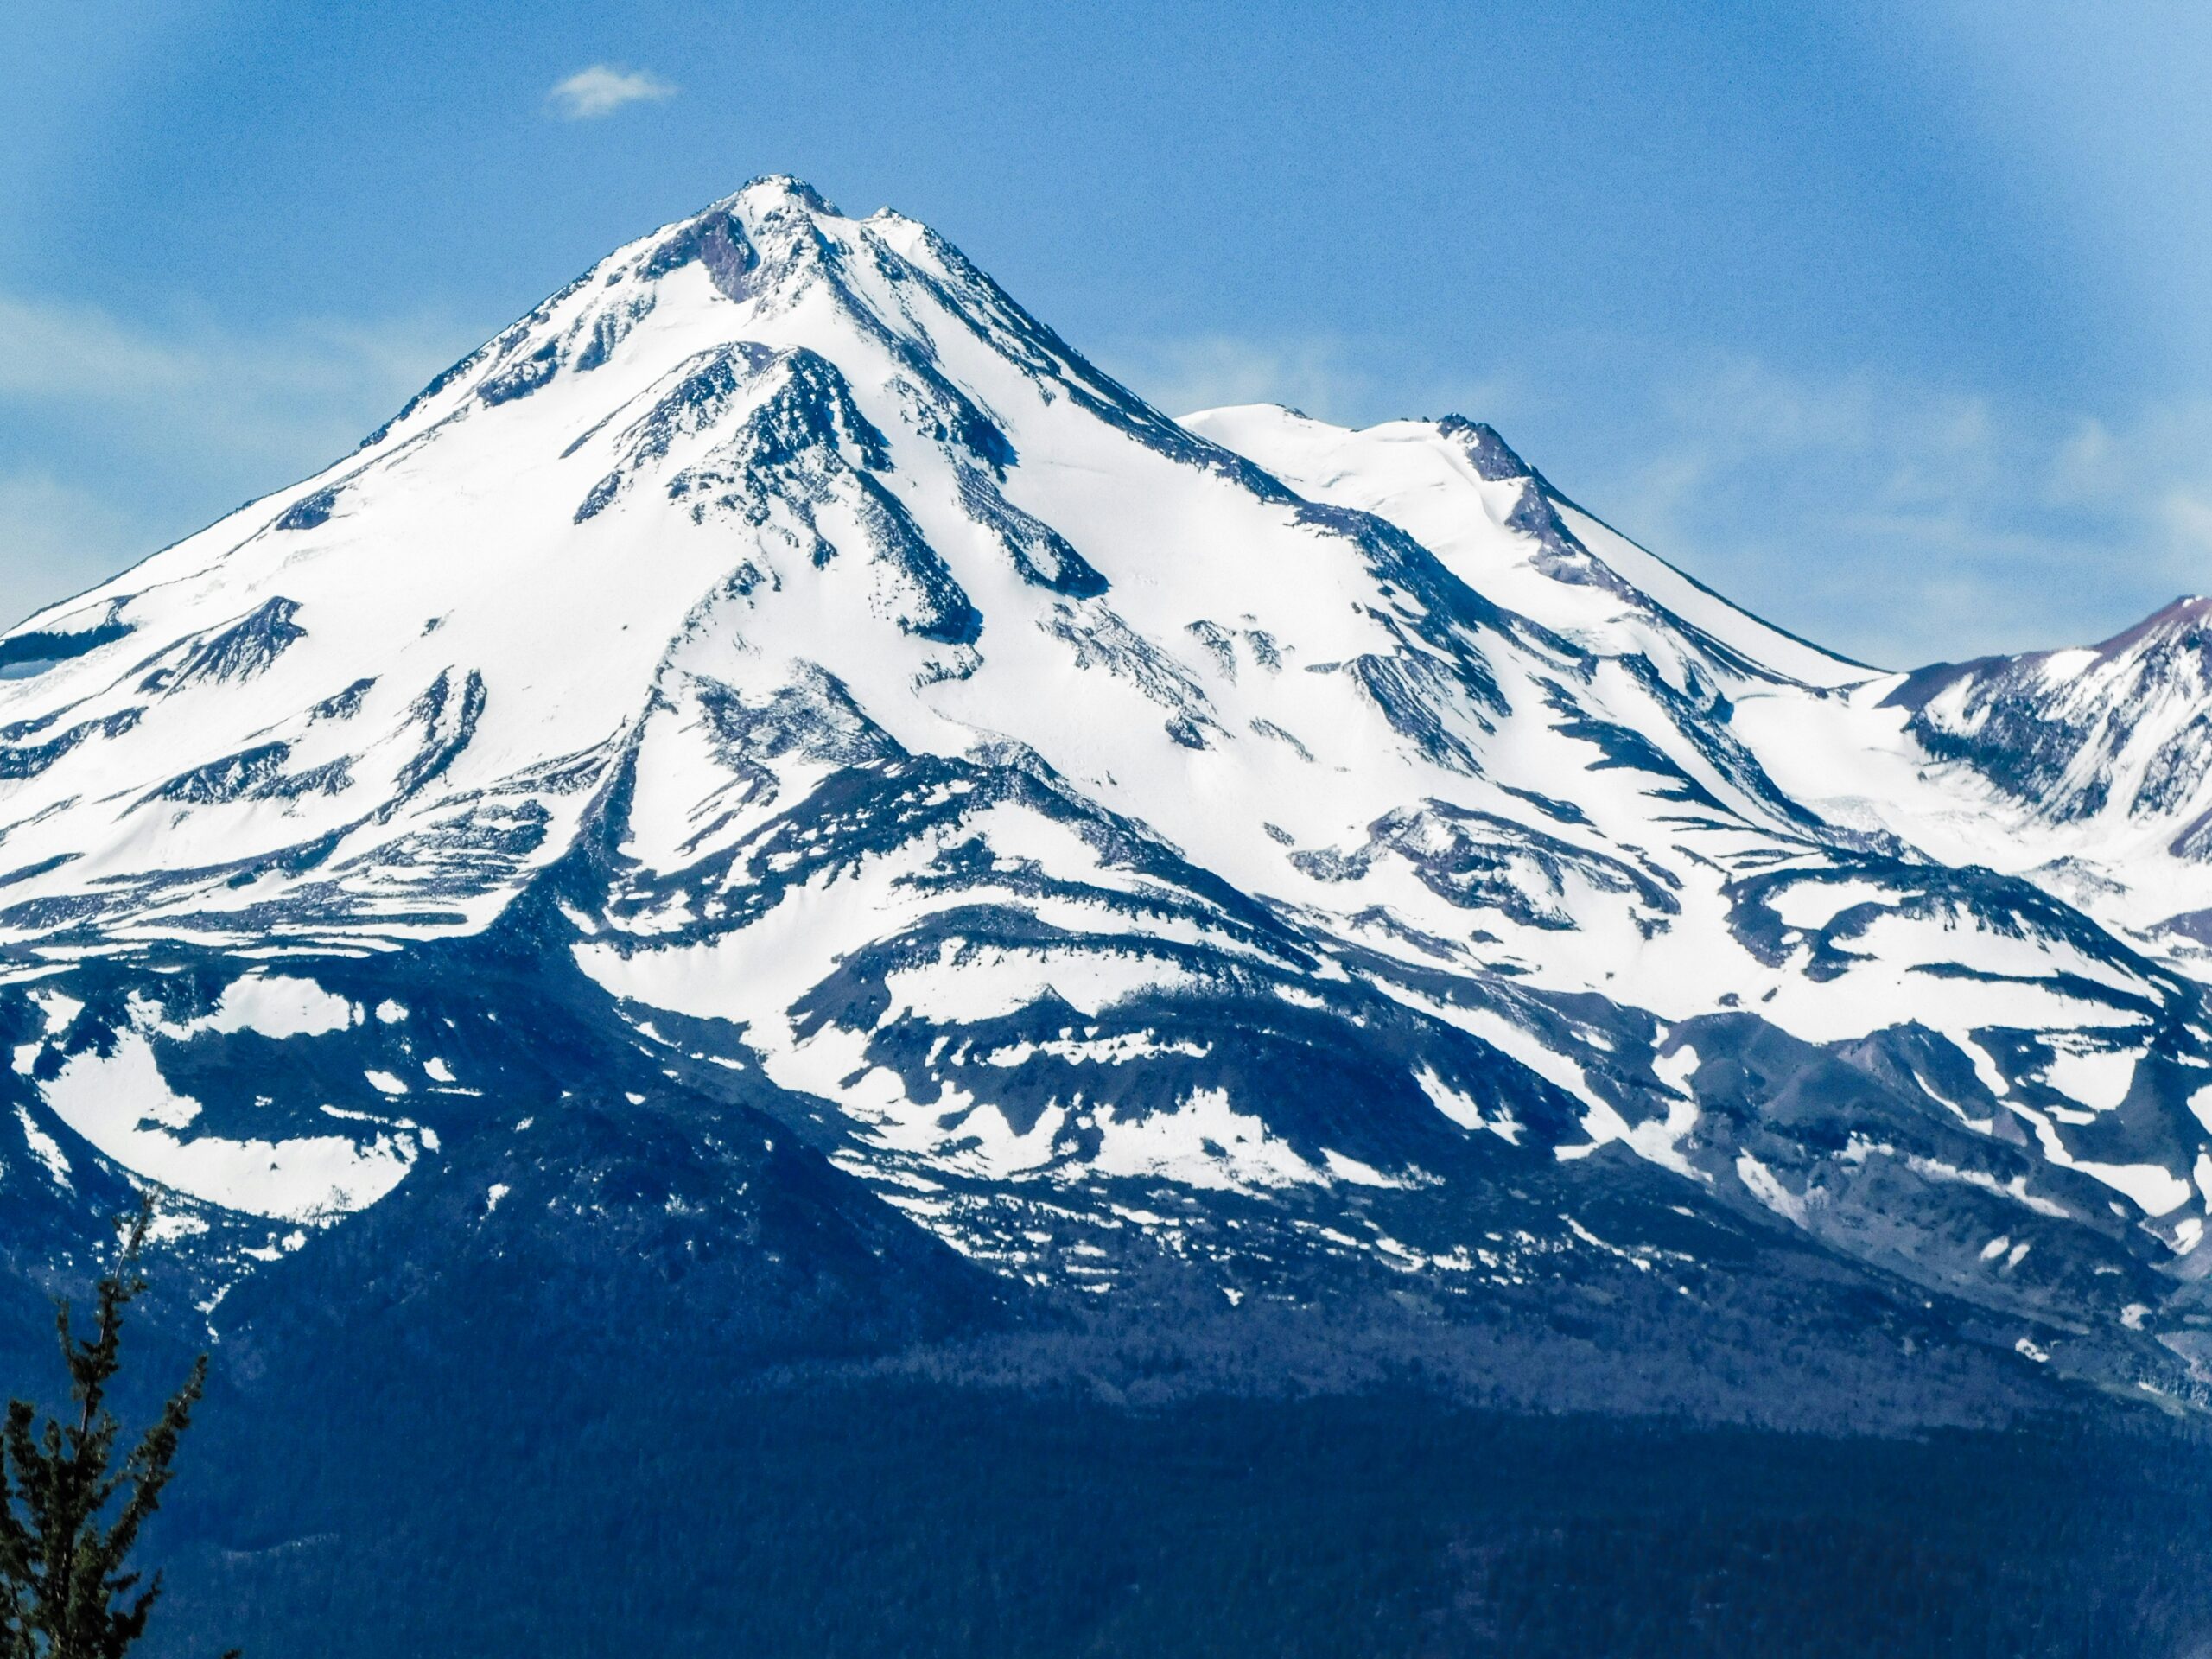 What Are Some Nearby Towns To Visit When In Mount Shasta Area?